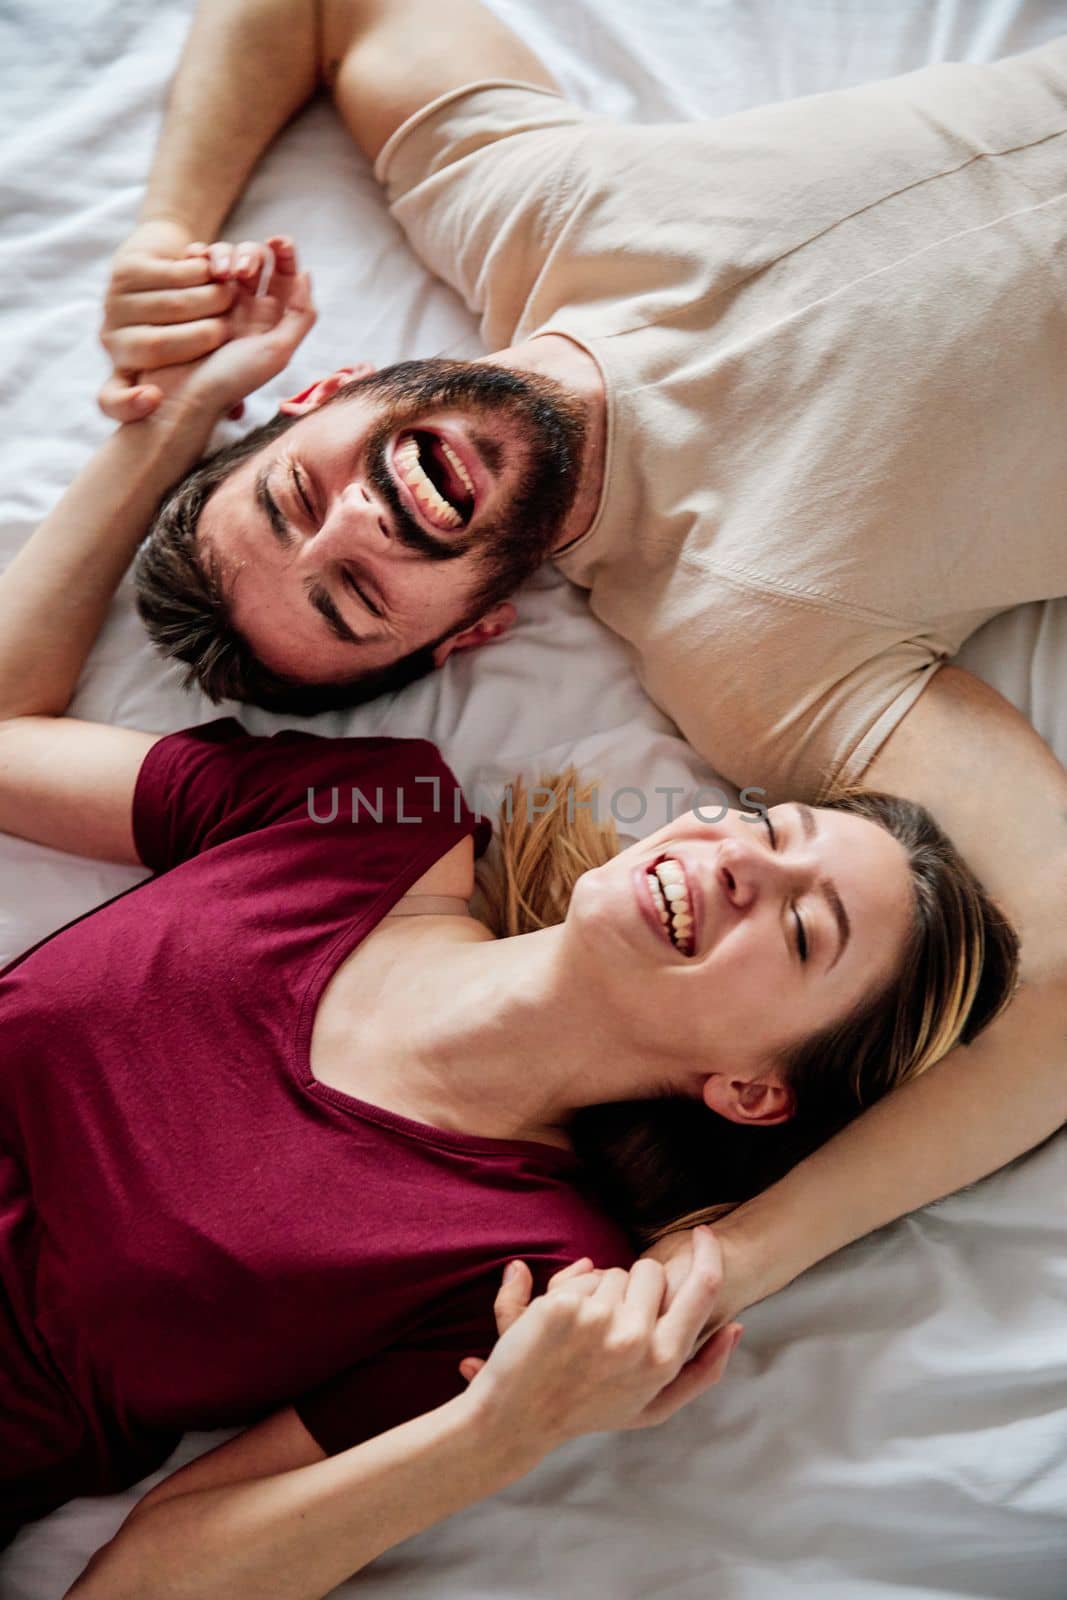 couple love bedroom bed lying romance happy relationship valentine day together man woman by Picsfive